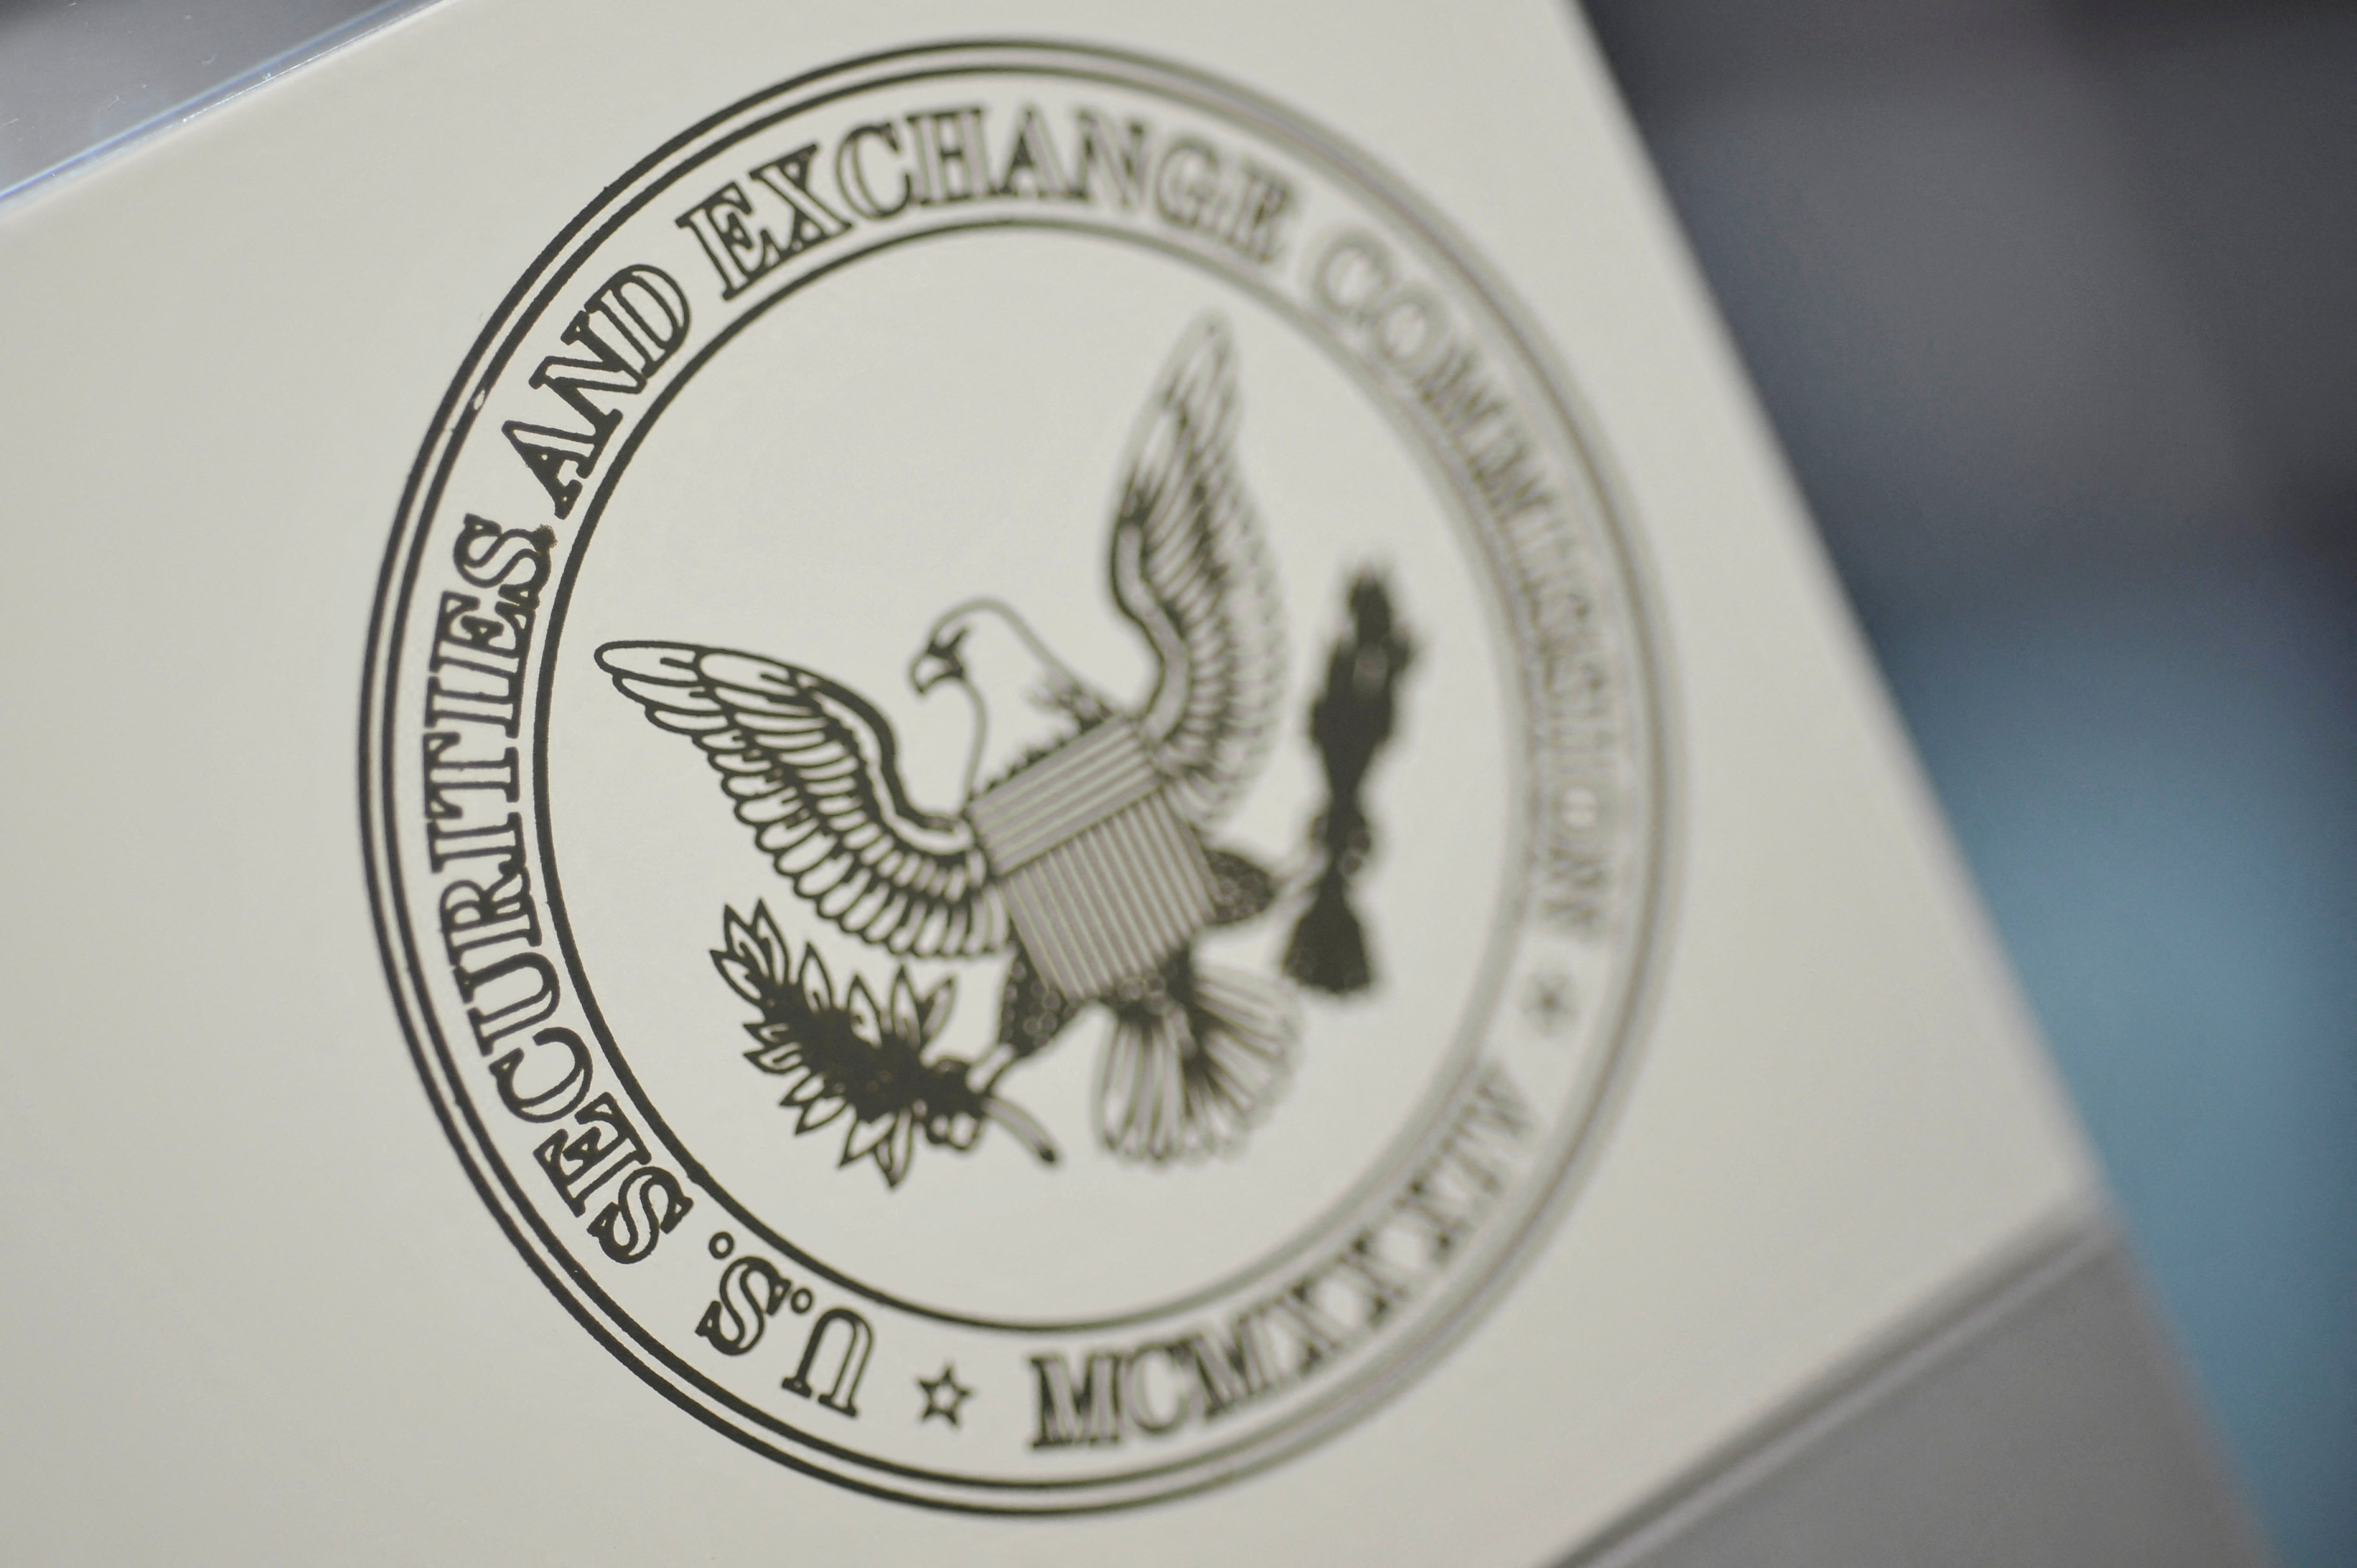 Due To Ethereum Bias: Watchdog Sues SEC Over ‘ETH Gate’